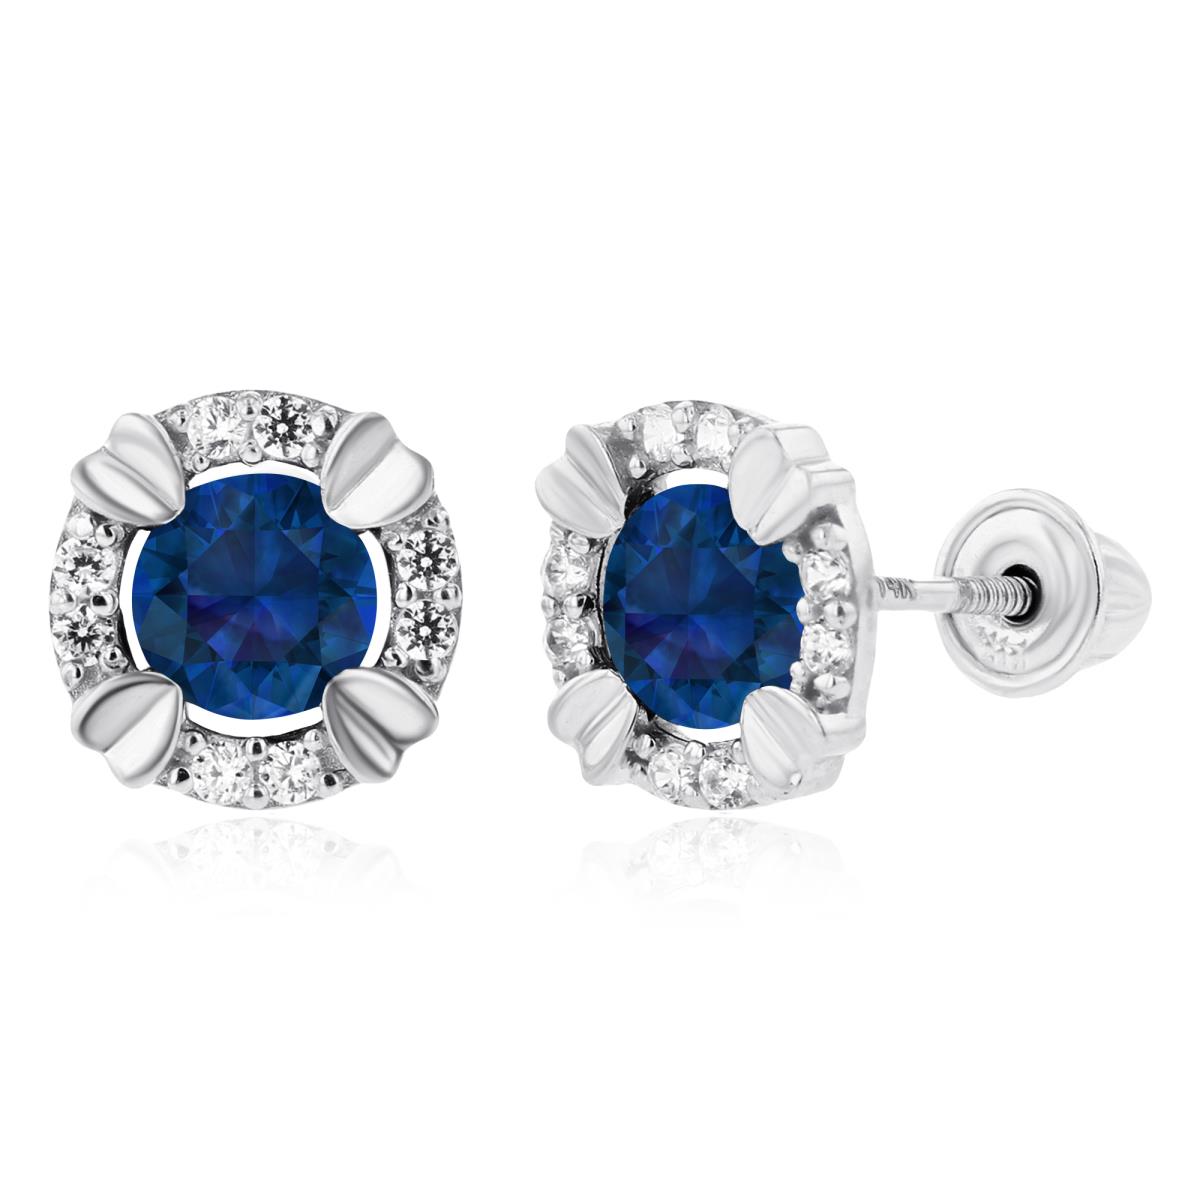 14K White Gold 4mm Round Created Blue Sapphire & 1mm Created White Sapphire Halo Screwback Earrings